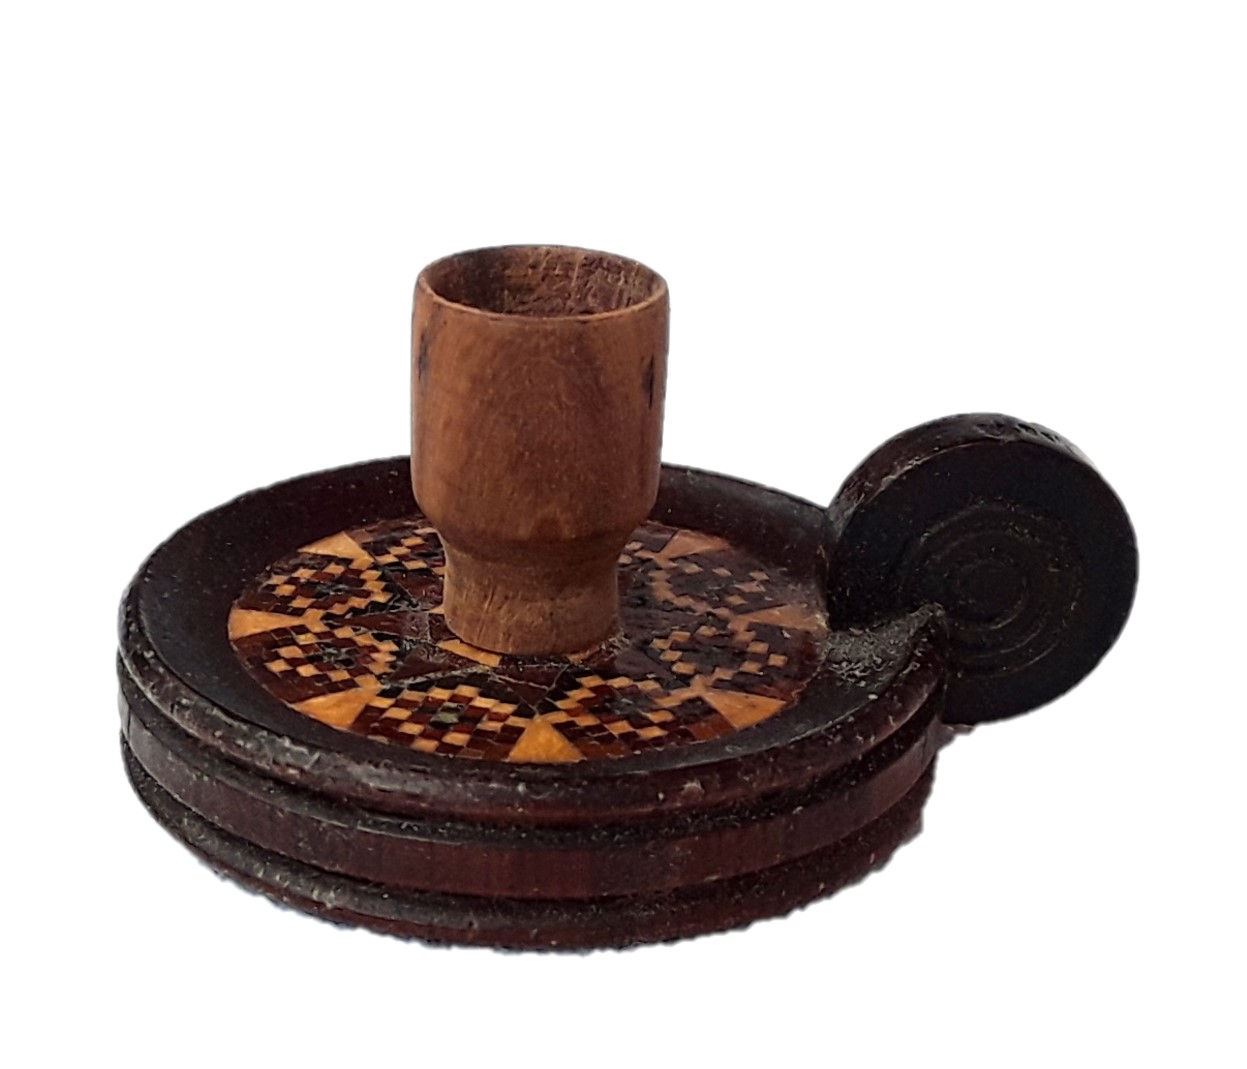 Candlestick 1501 - Click for details